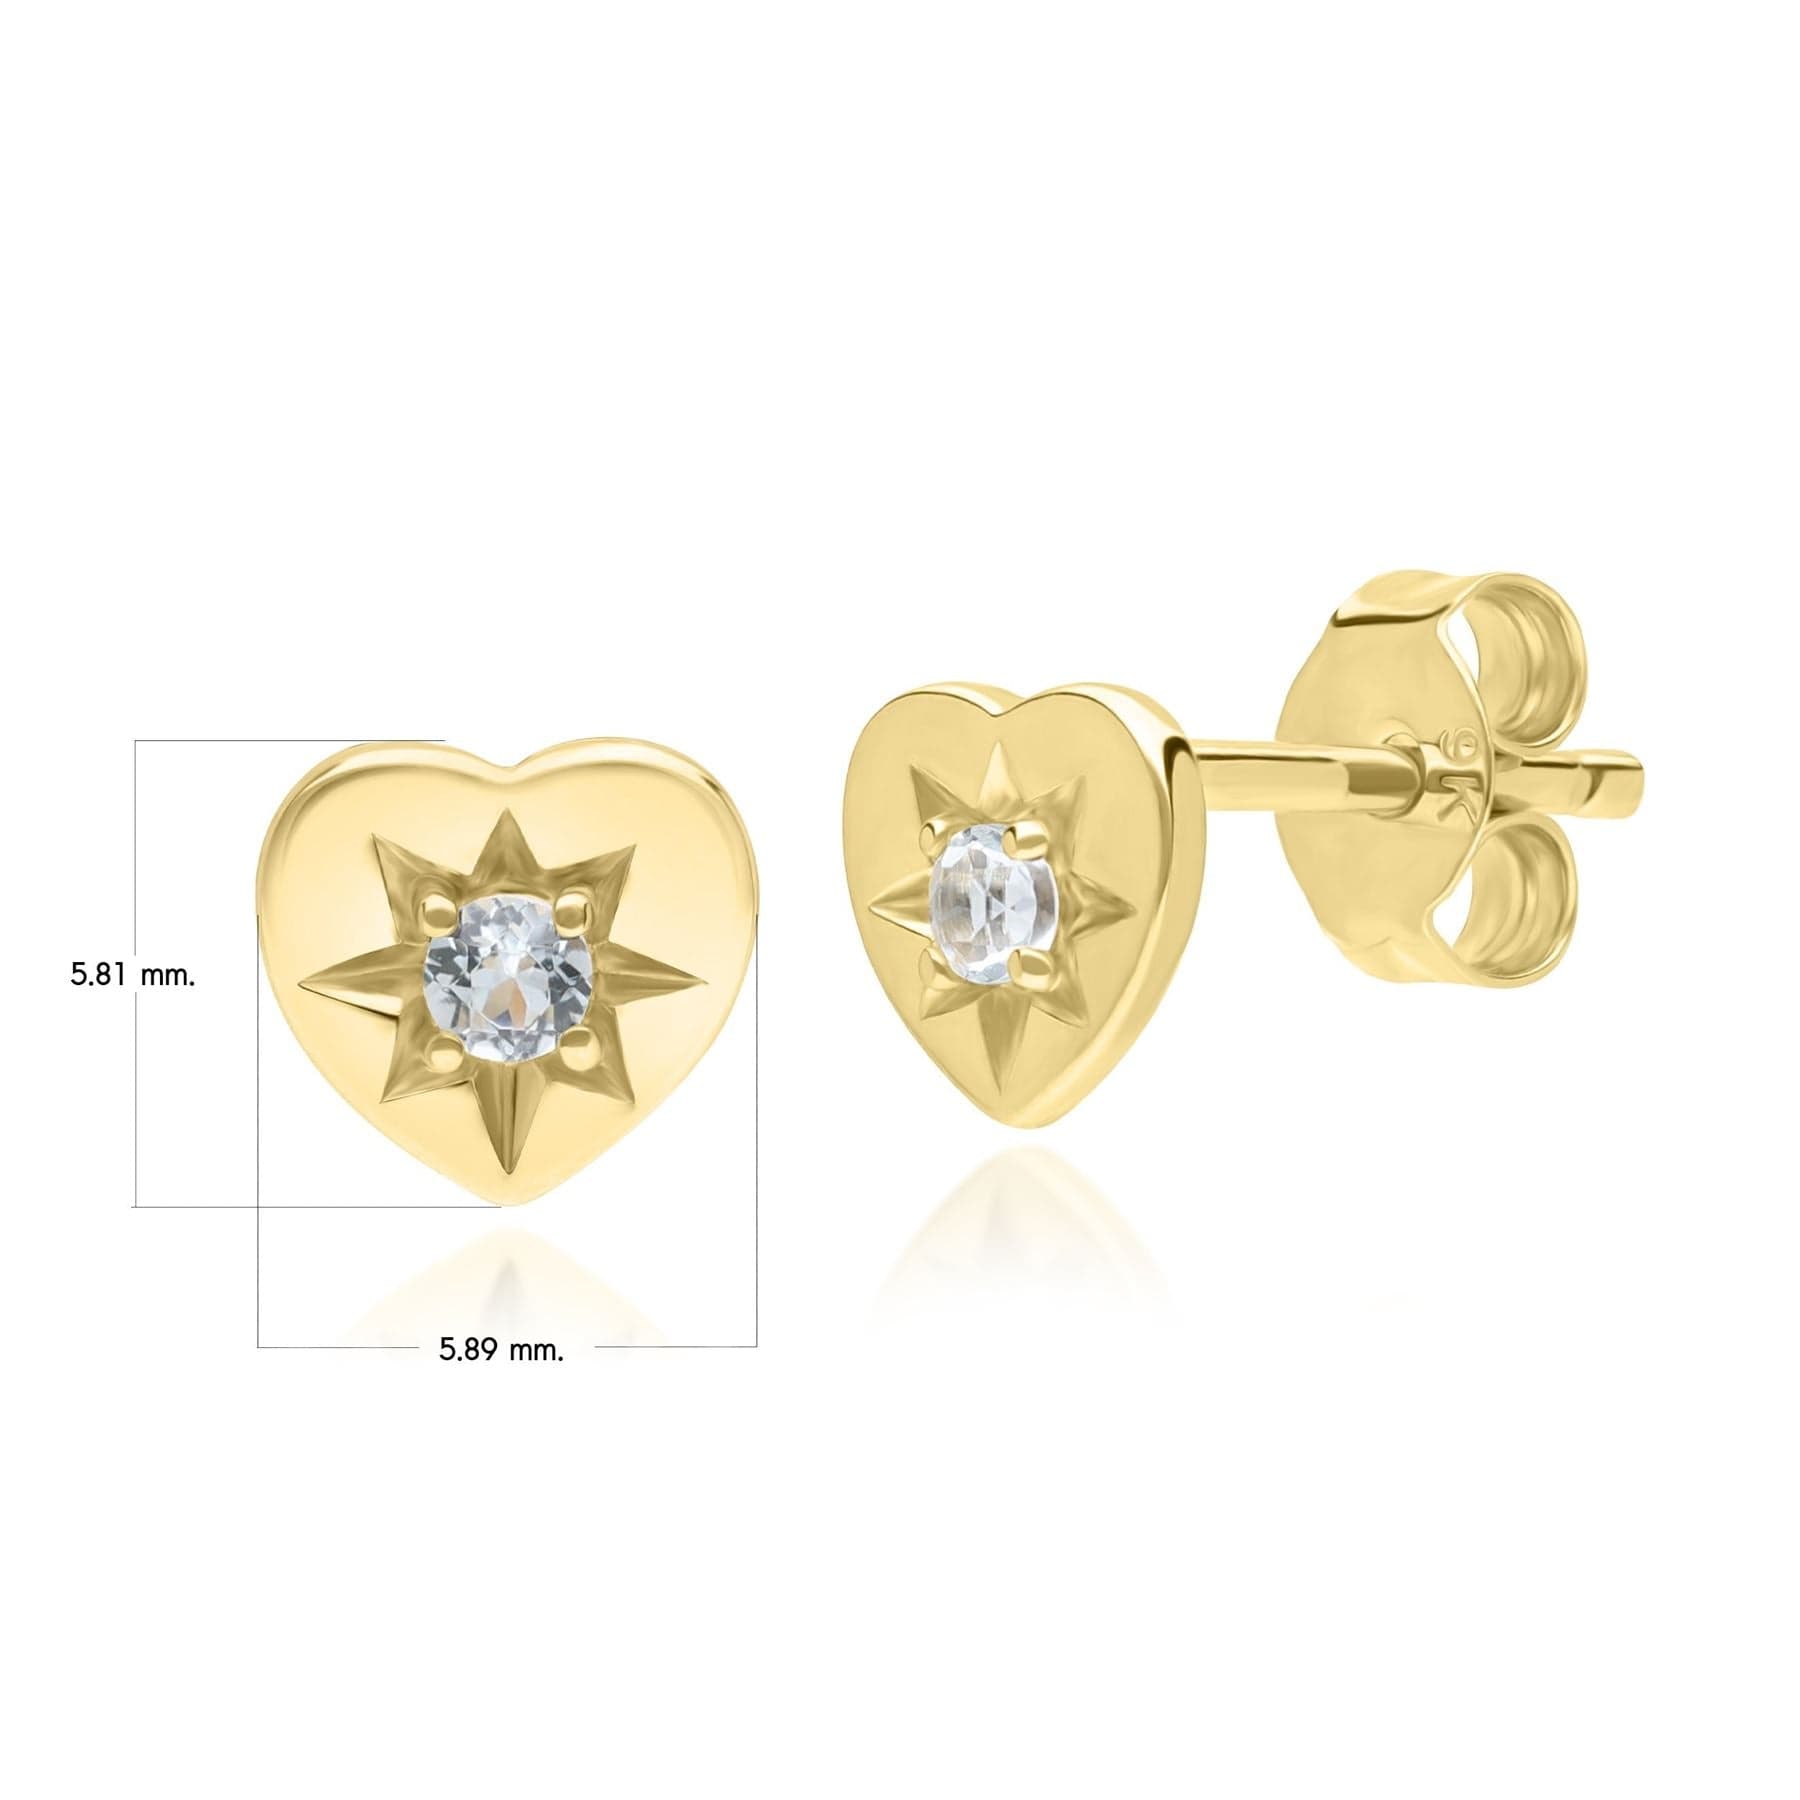 135E1820029 ECFEW™ 'The Liberator' Blue Topaz Heart Stud Earrings in 9ct Yellow Gold Dimensions